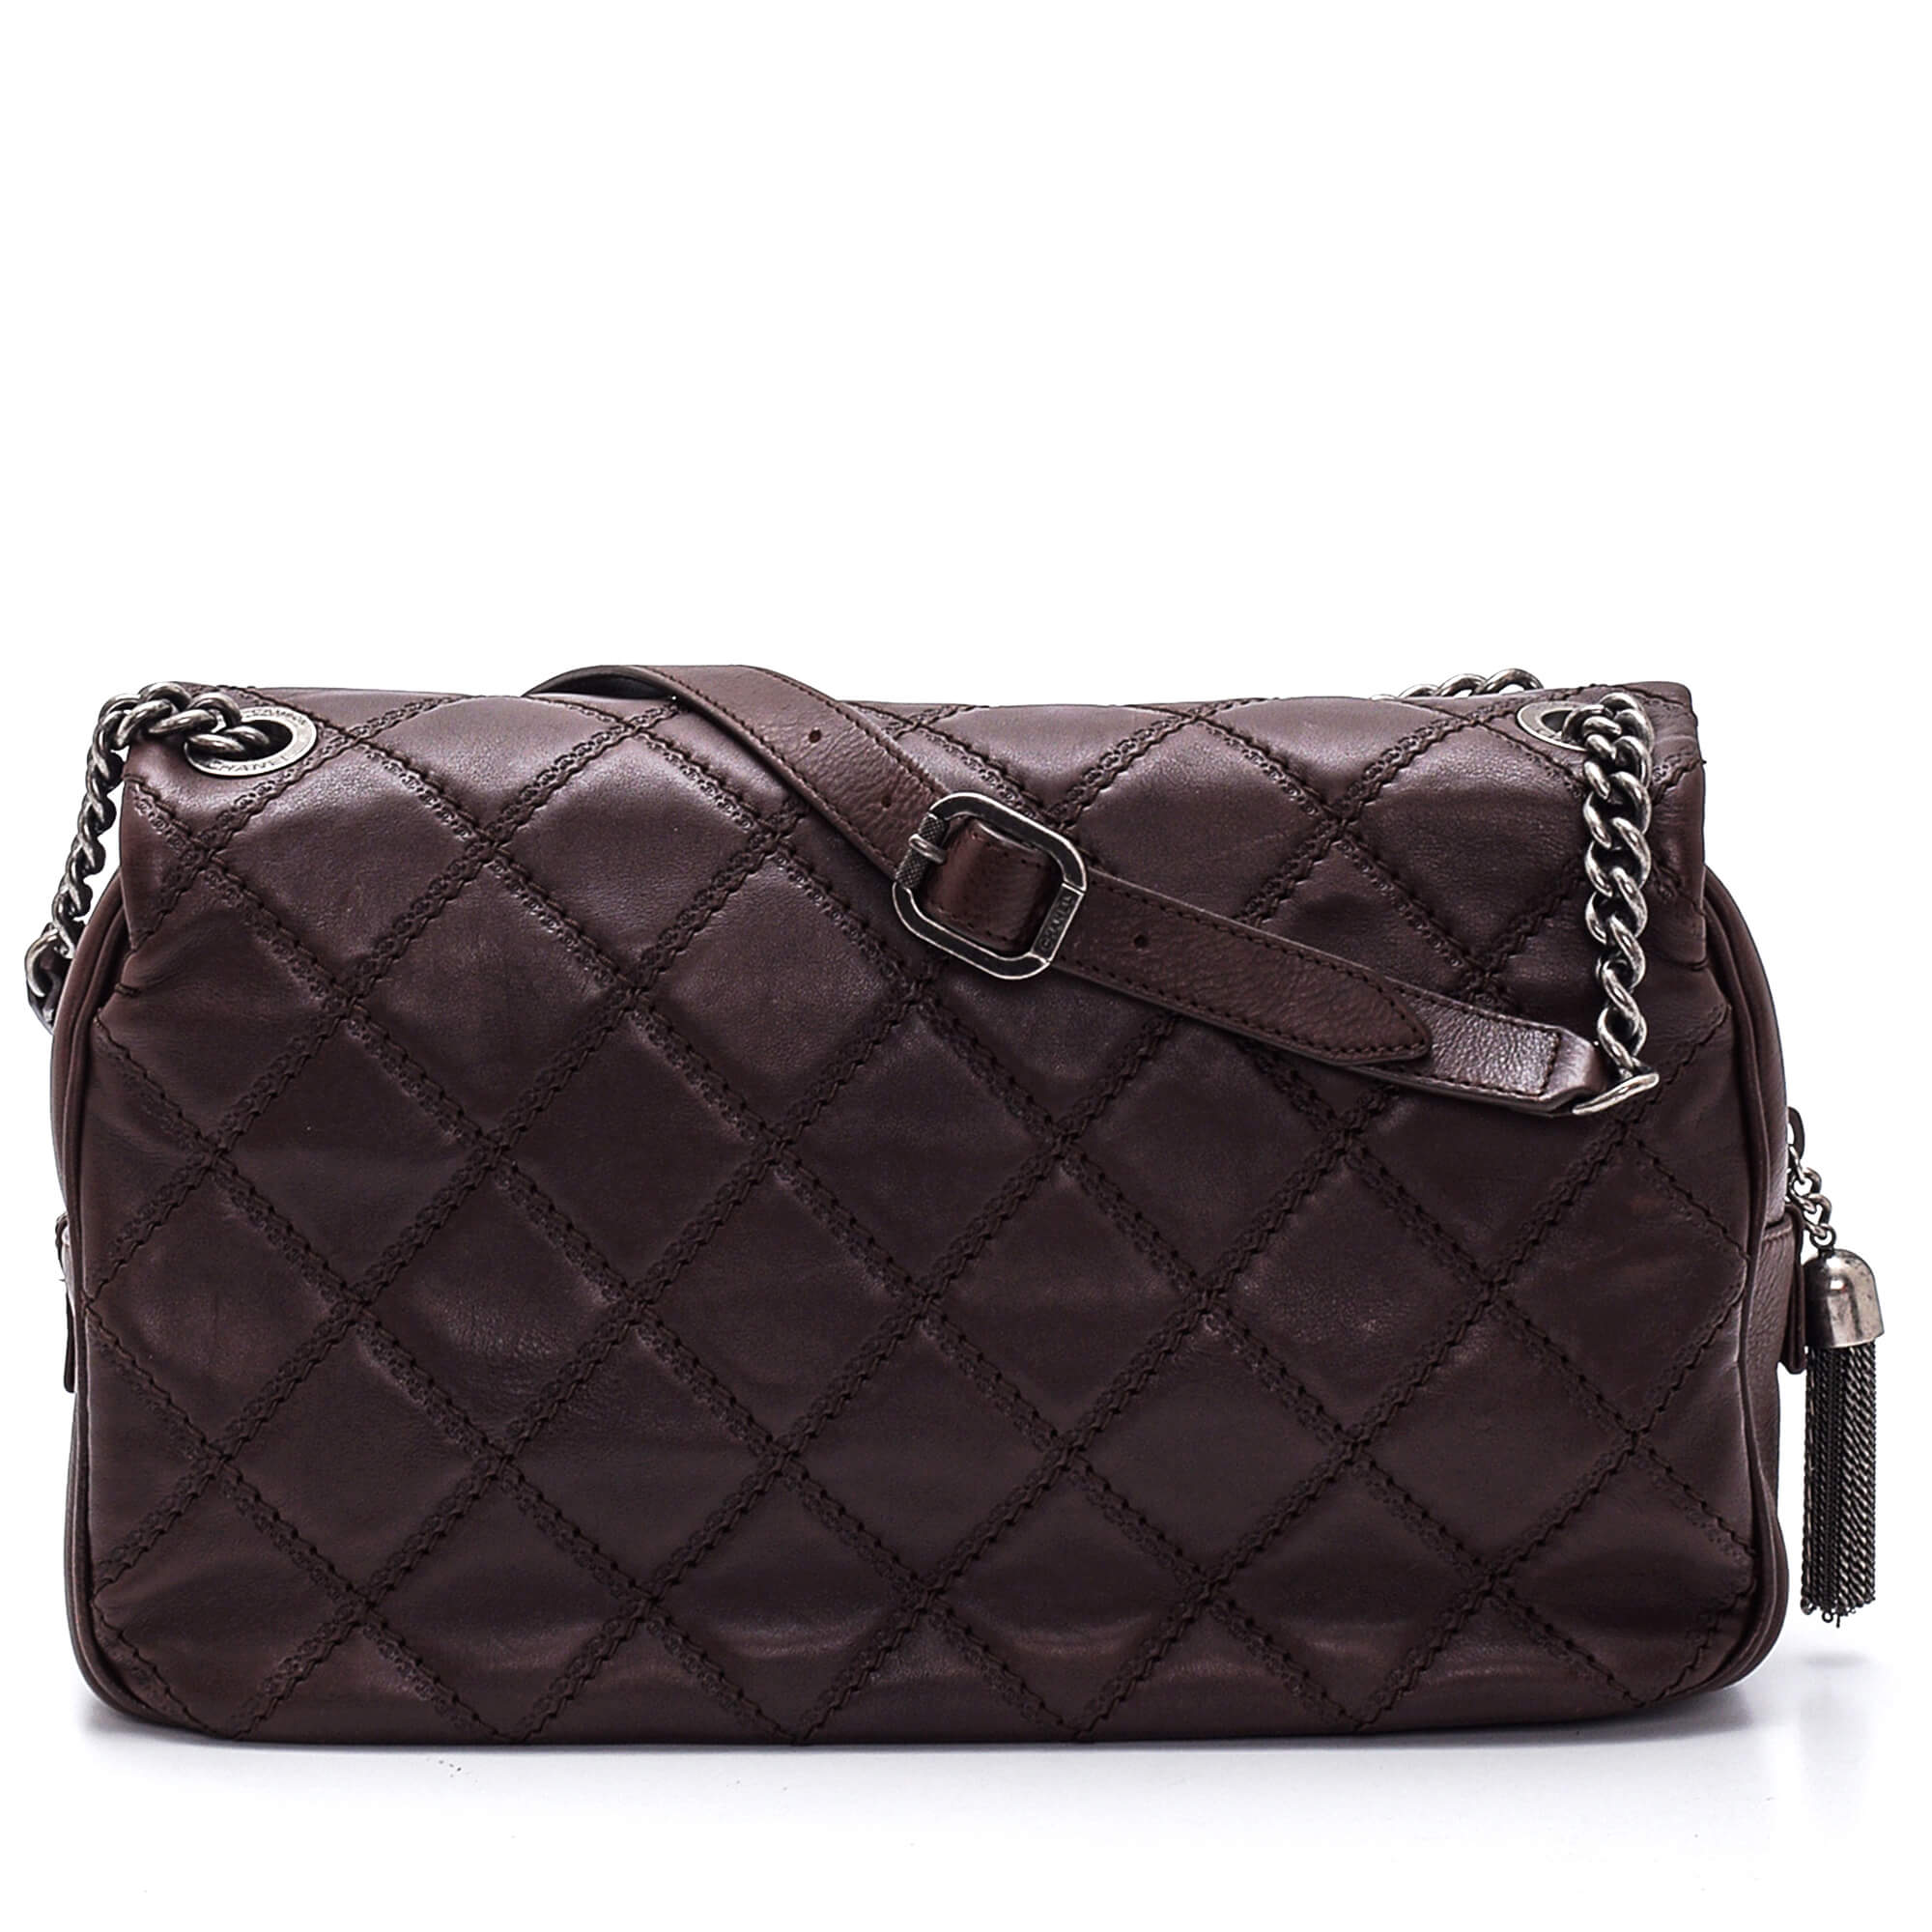 Chanel - Dark Brown Quilted Leather Cambon 31 Rue Flap Bag